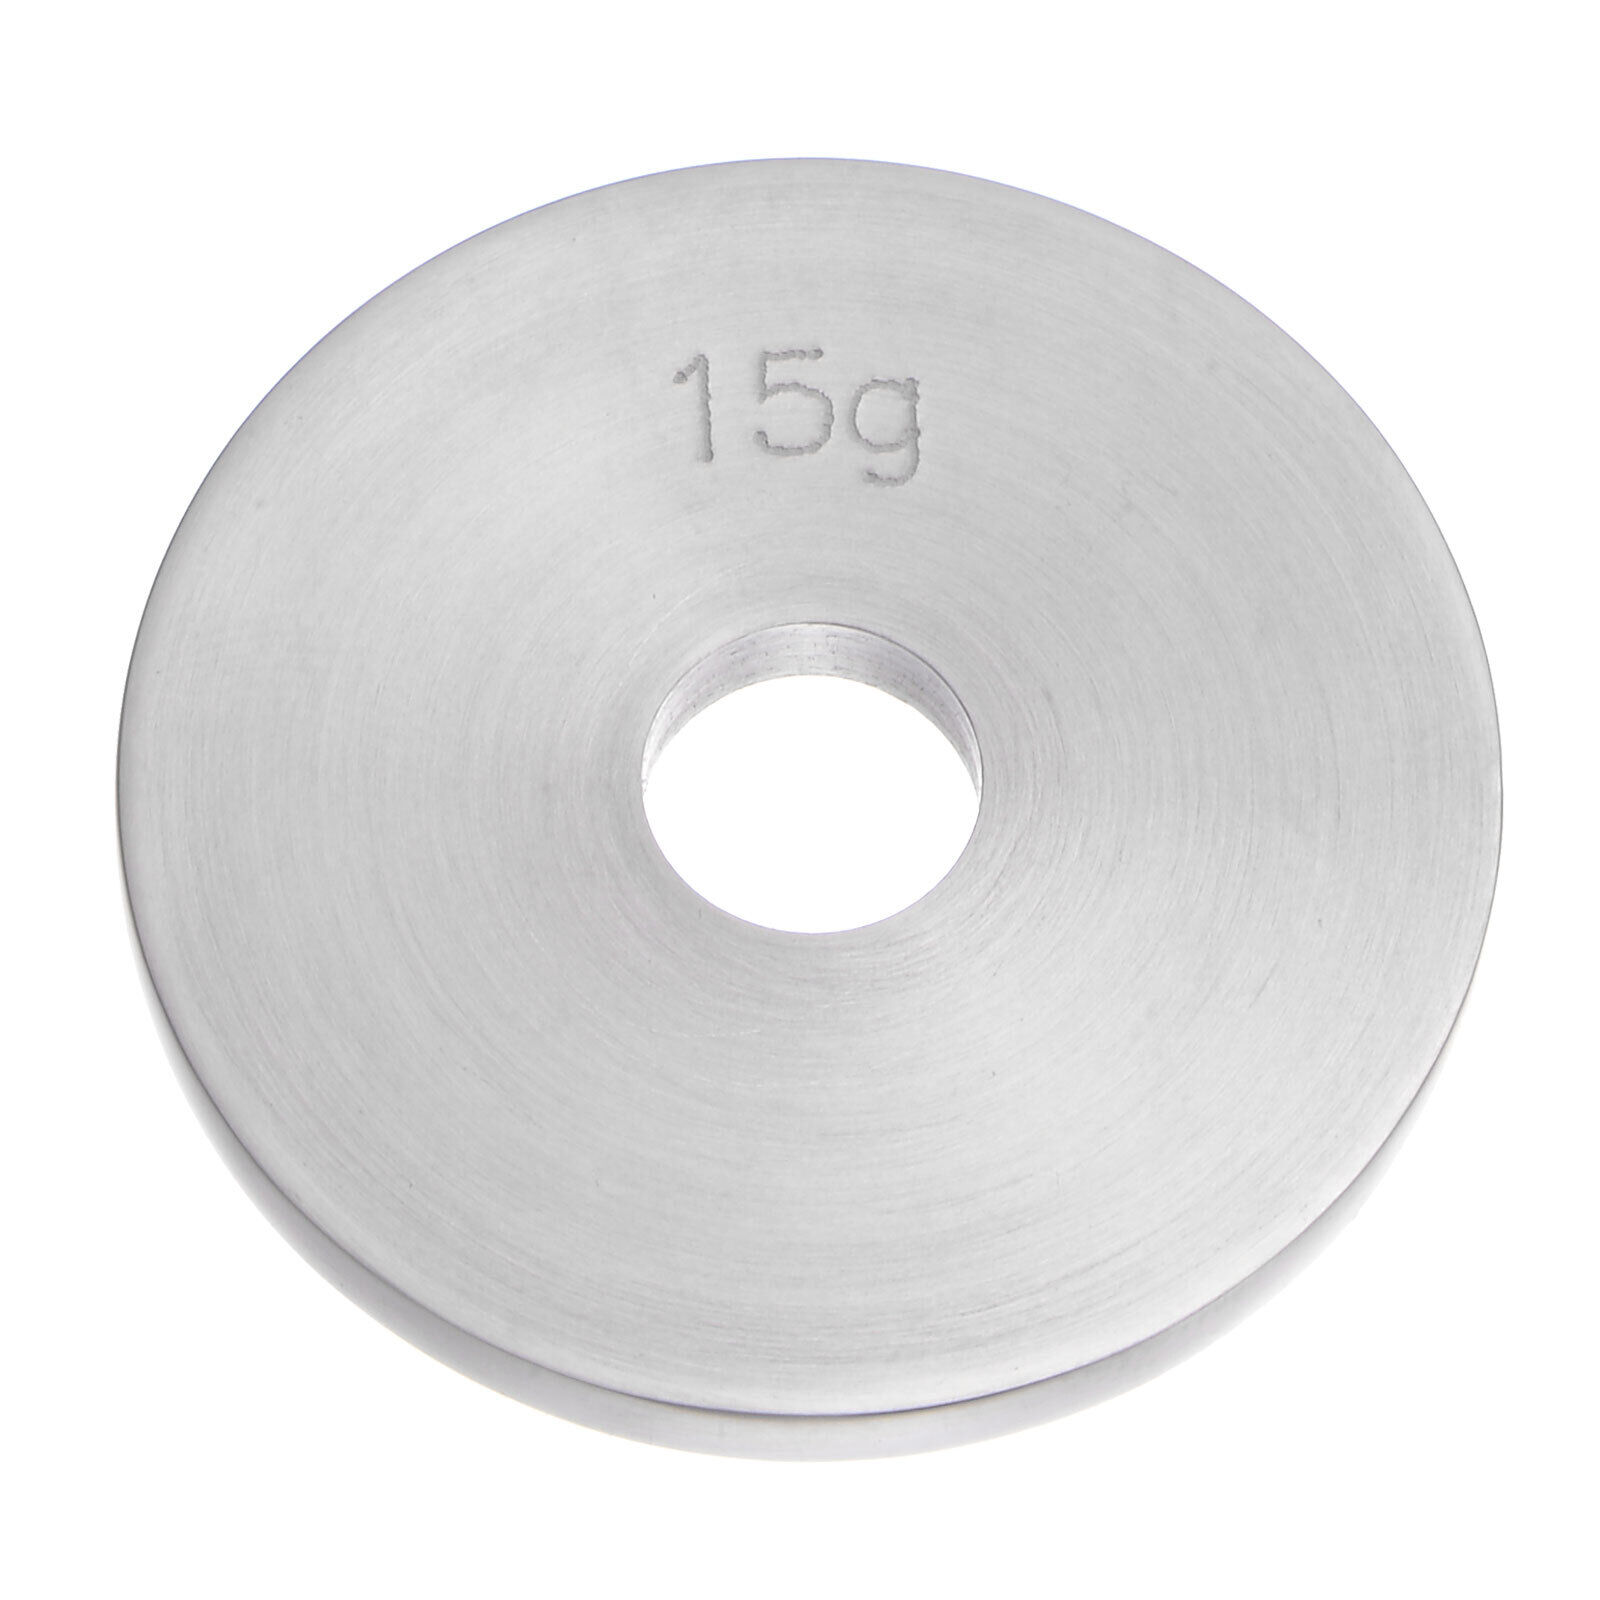 Slotted Calibration Weight 15g M1 Precision 2cr13 Steel For Digital Scales